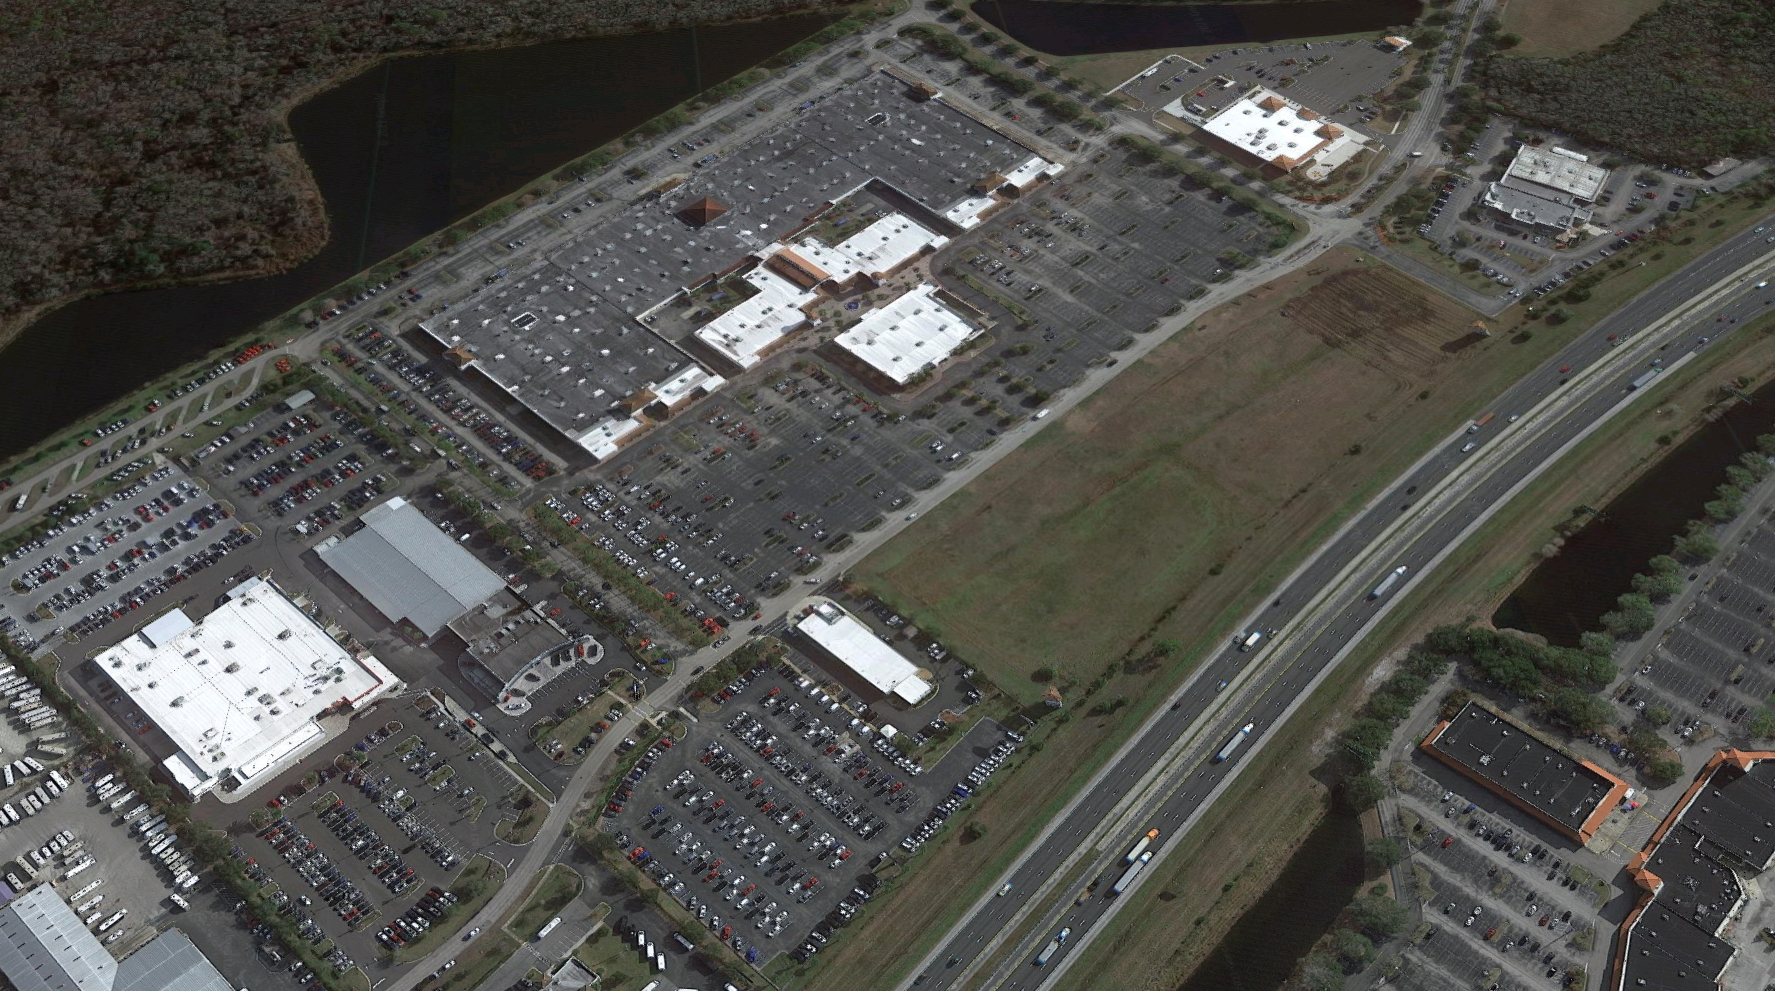 St. Augustine Outlets is on the east side of Interstate 95. (Google)